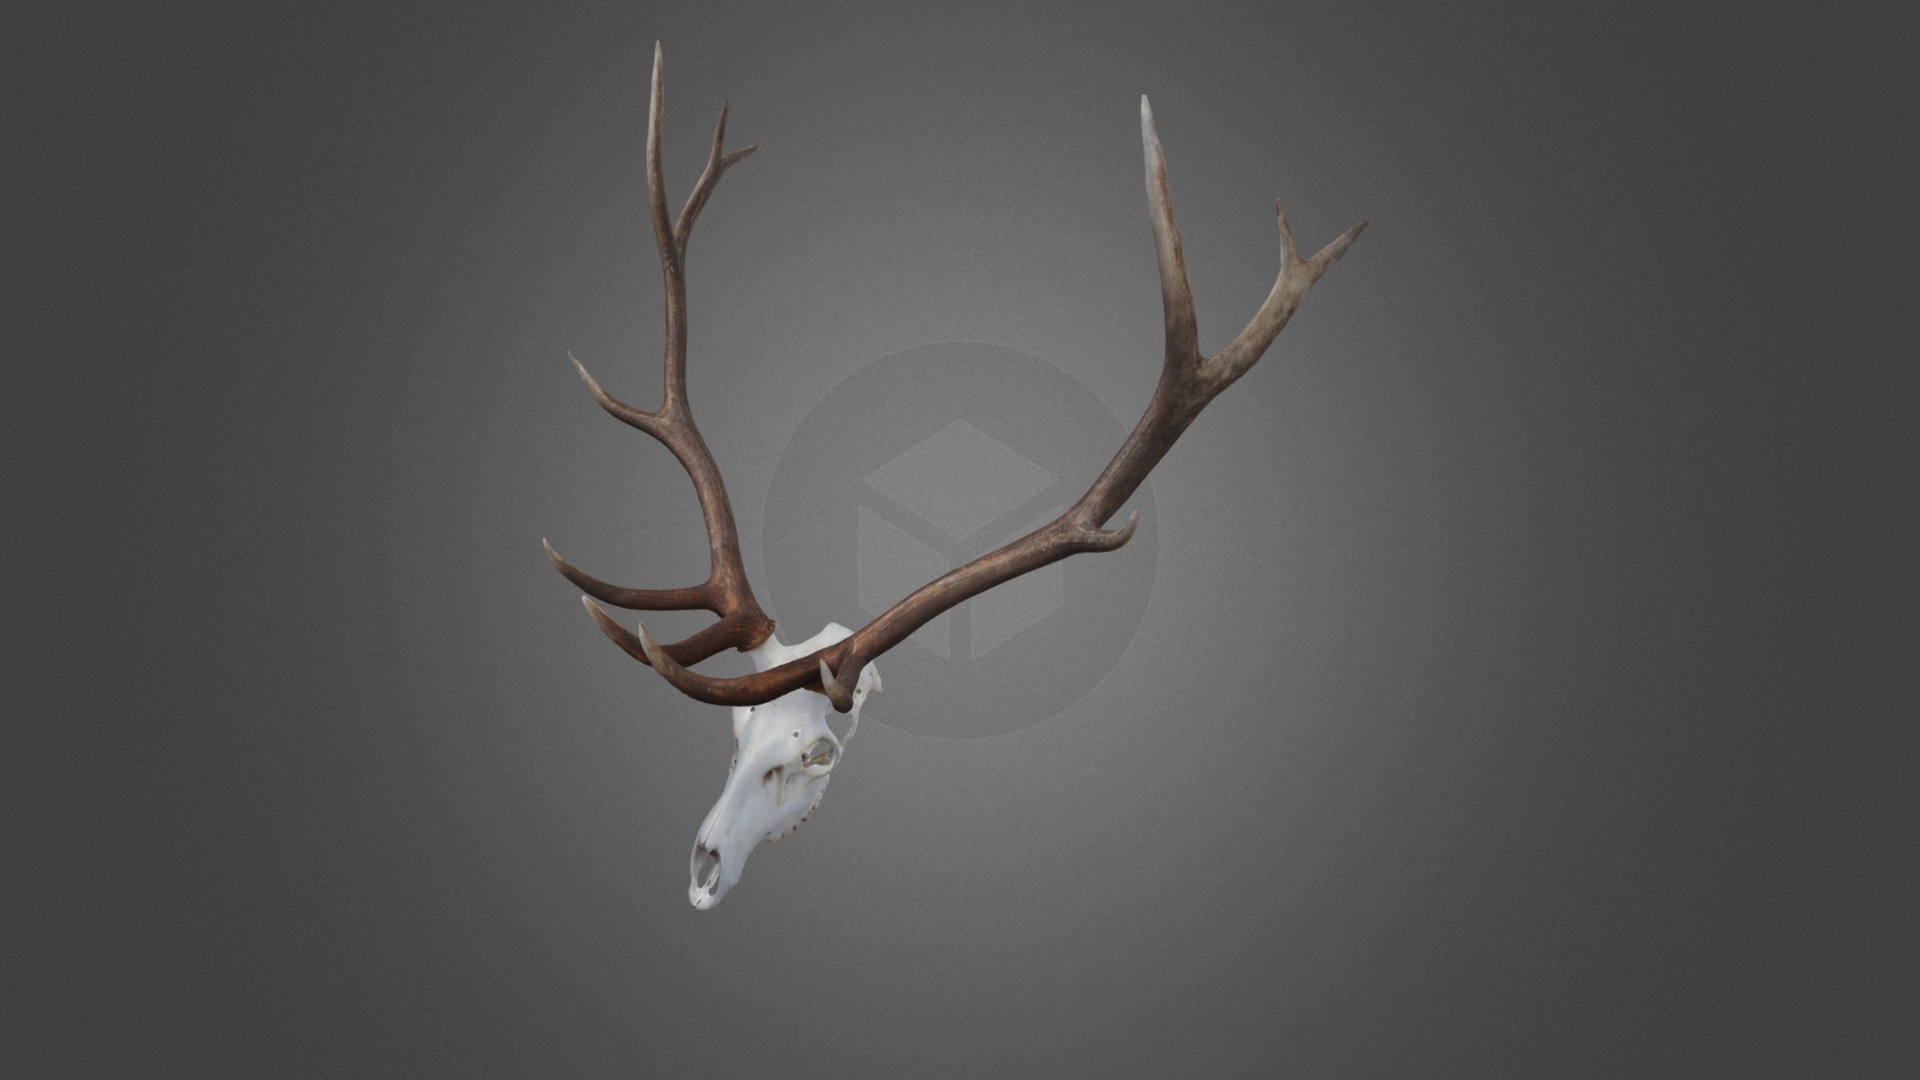 3D model Benjamin Bishop 2016 Archery Bull Elk - This is a 3D model of the Benjamin Bishop 2016 Archery Bull Elk. The 3D model is about a deer with antlers.